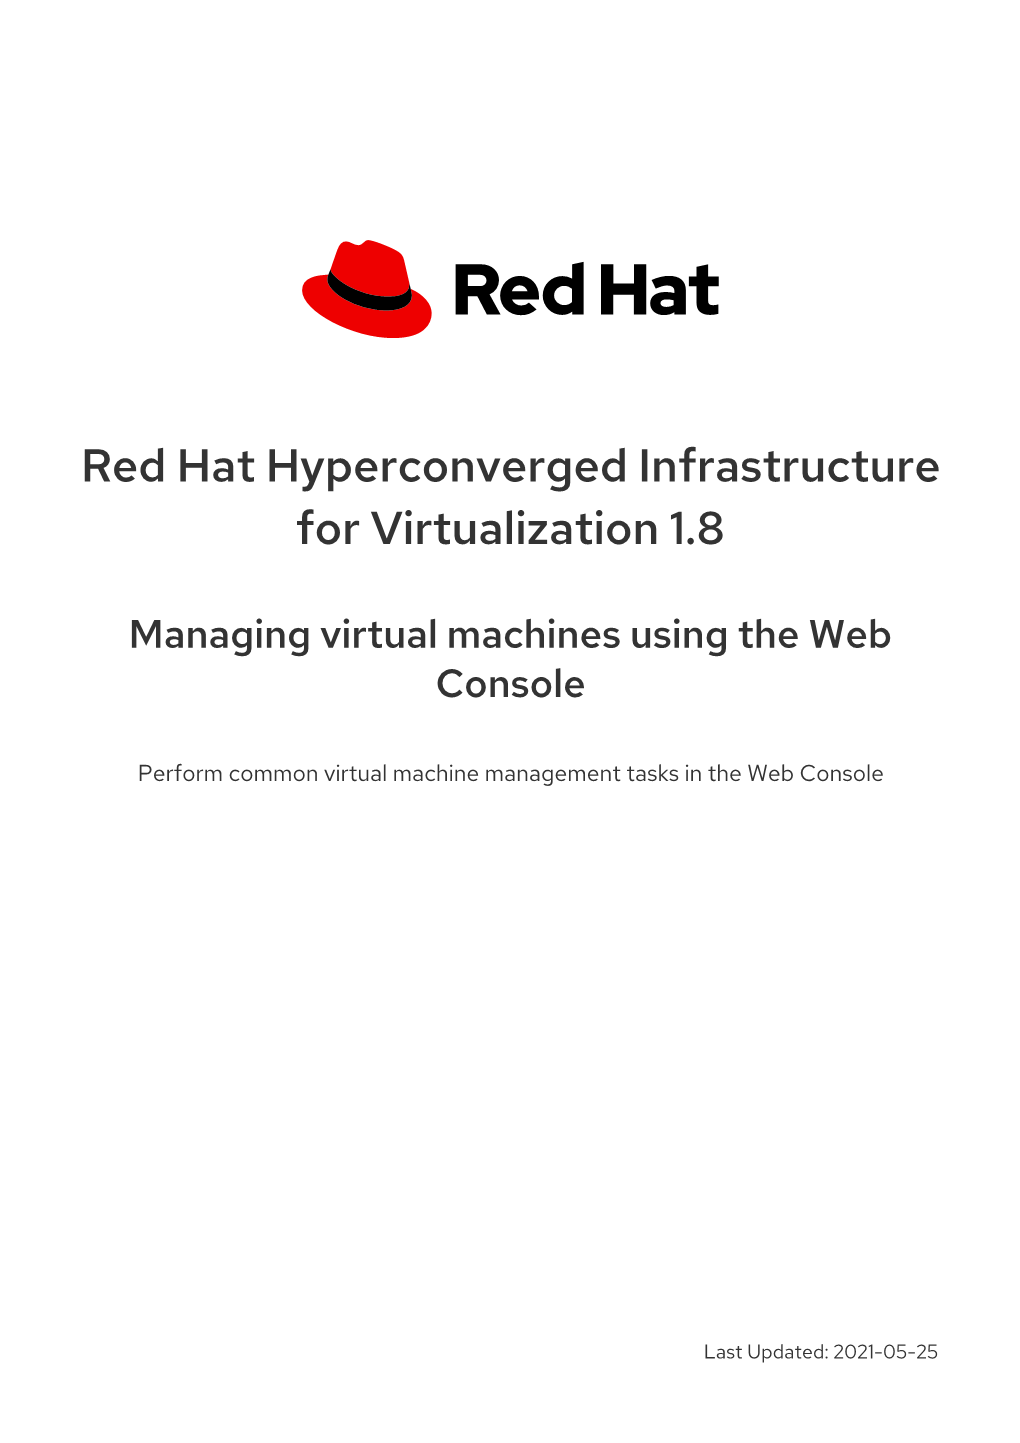 Red Hat Hyperconverged Infrastructure for Virtualization 1.8